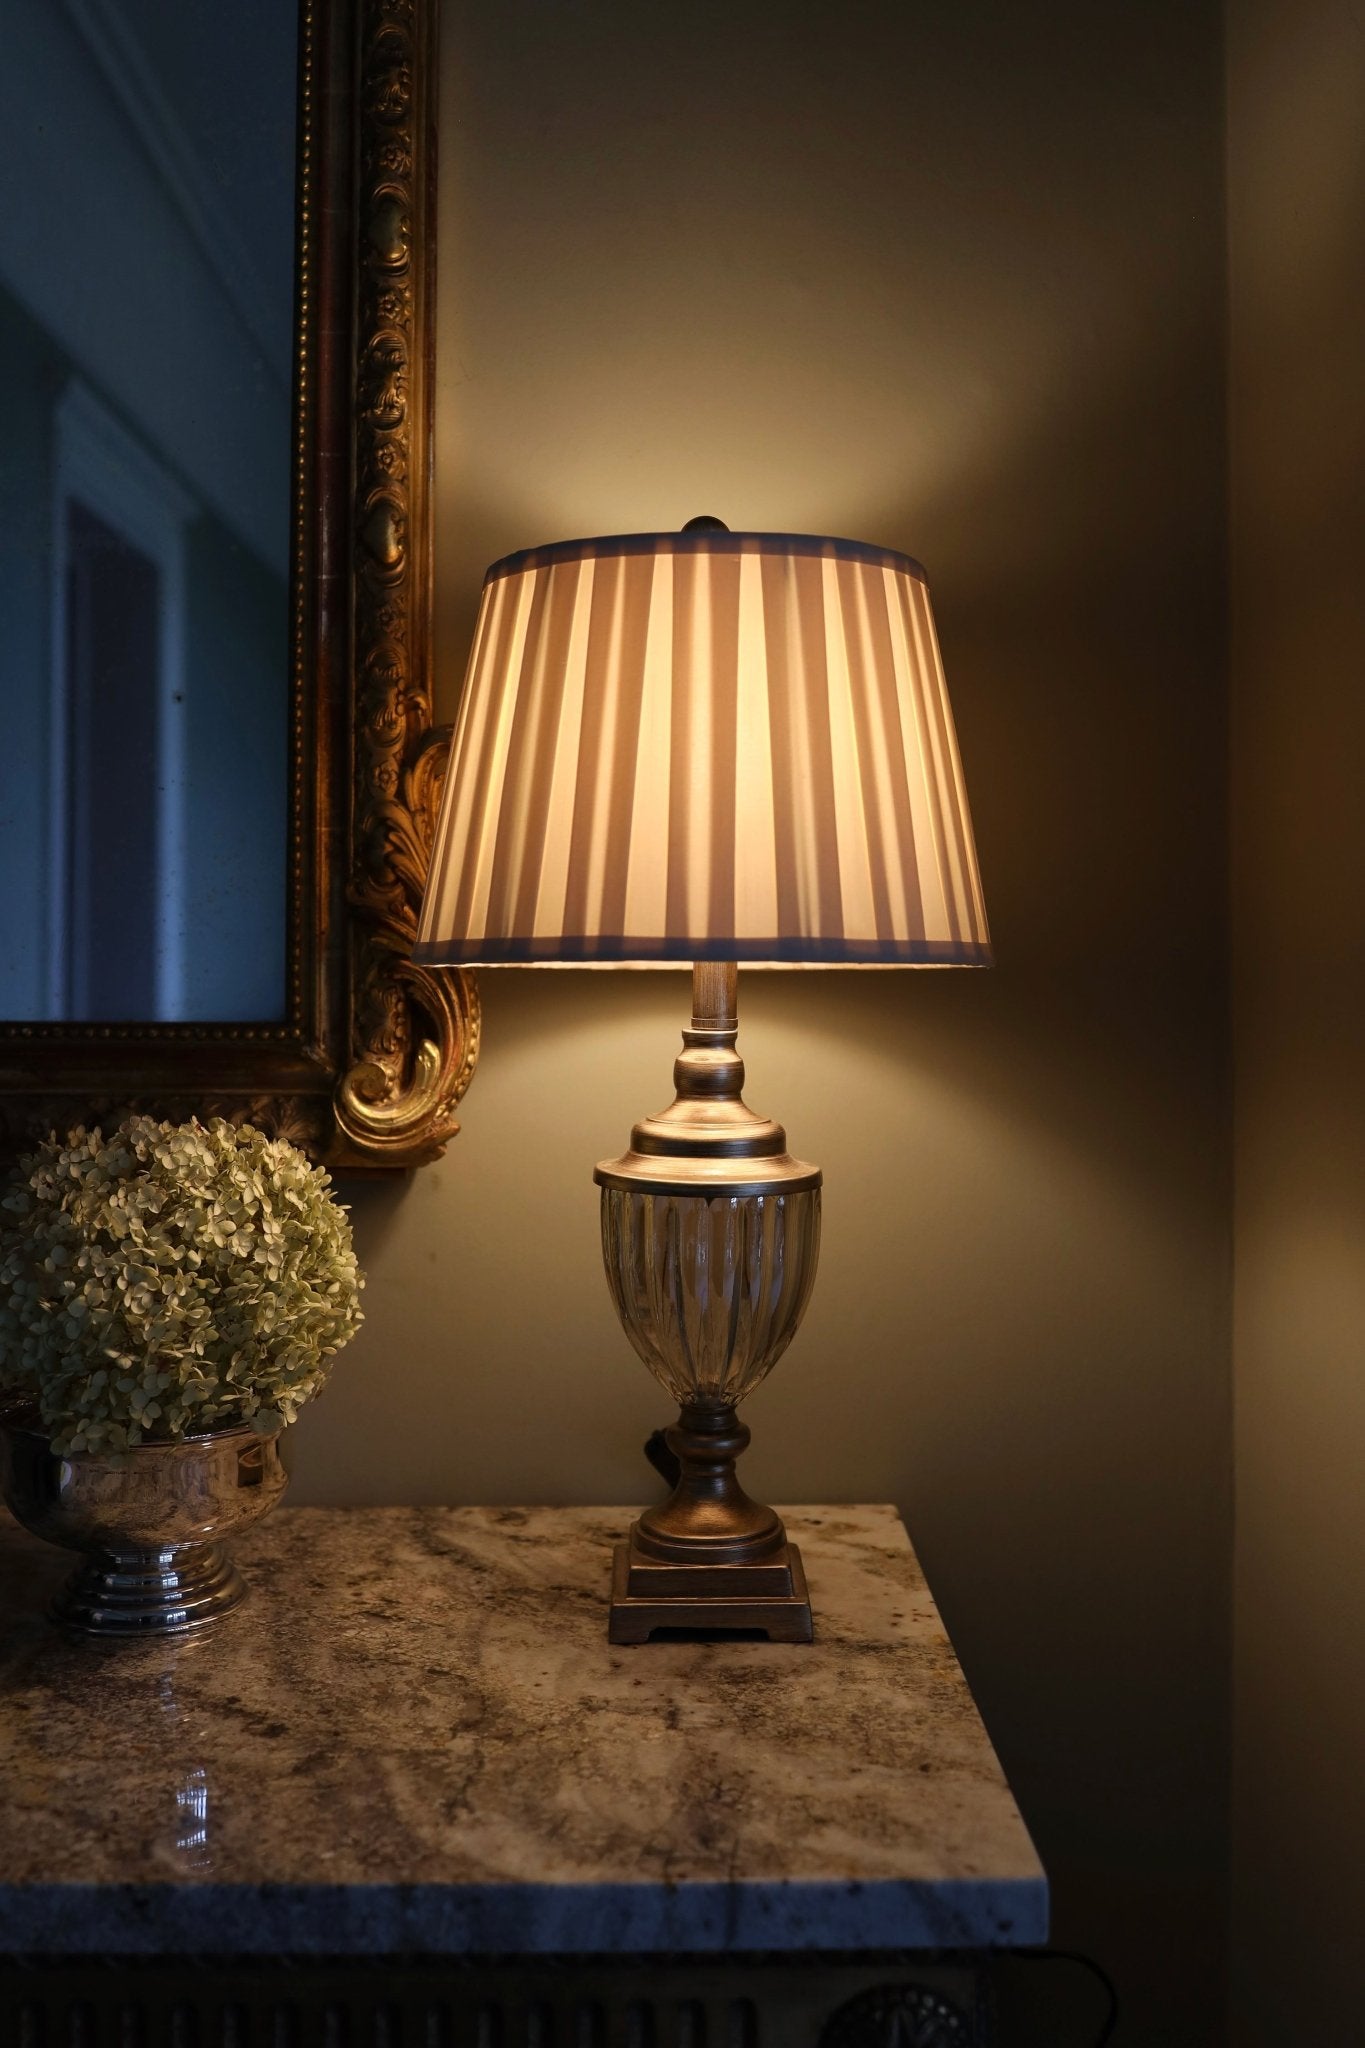 A set of two decorative table lamps - Clementine Parker